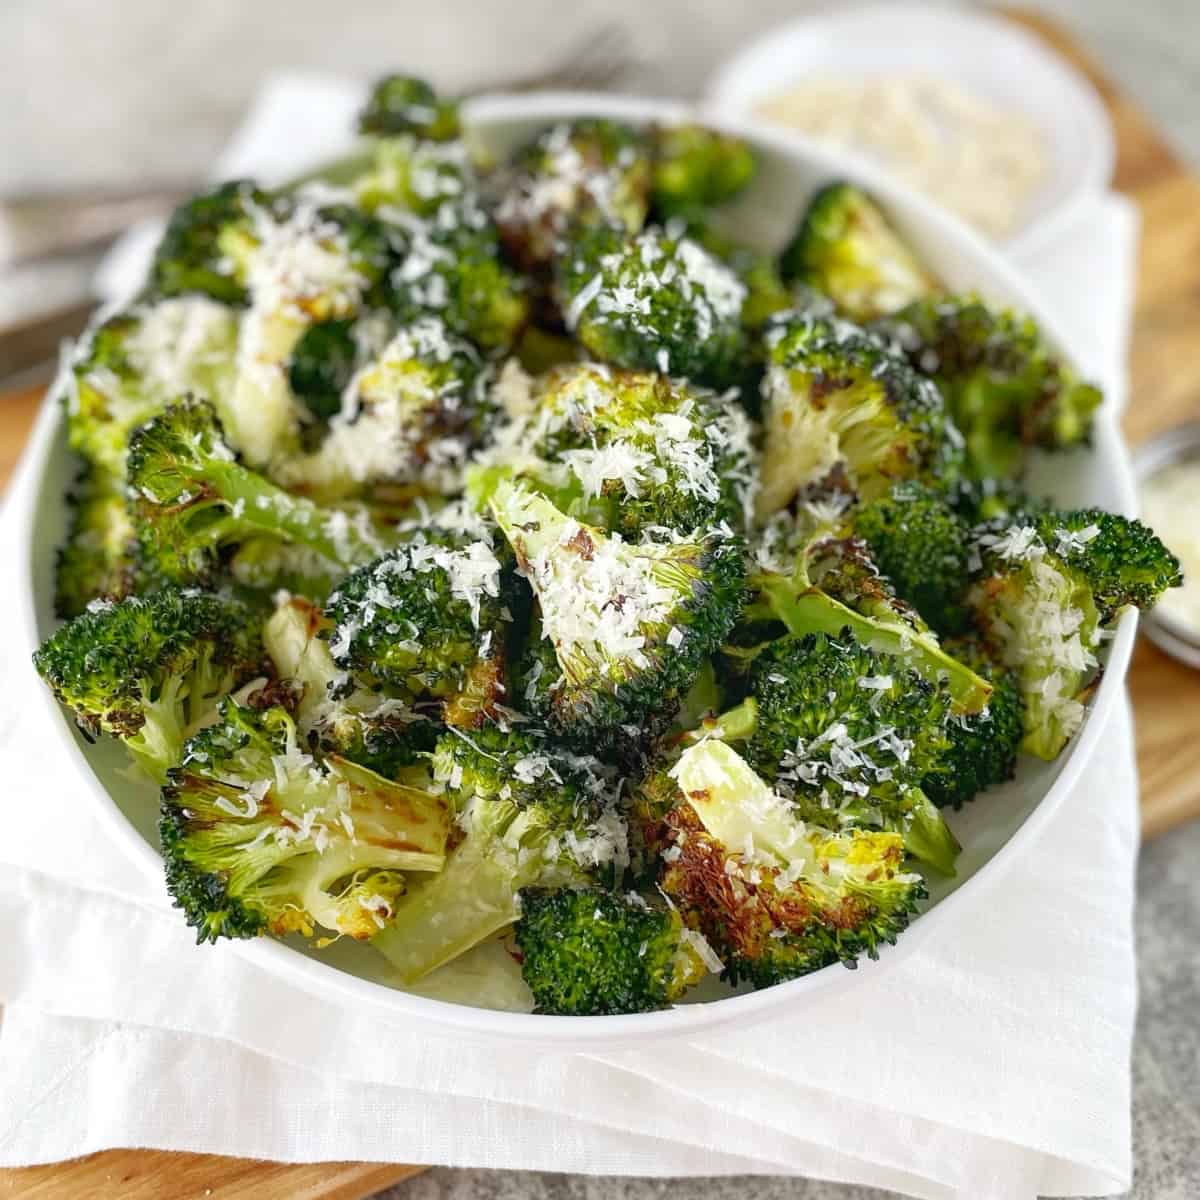 A white bowl with pieces of charred broccoli sprinkled with parmesan cheese on a wooden board with a